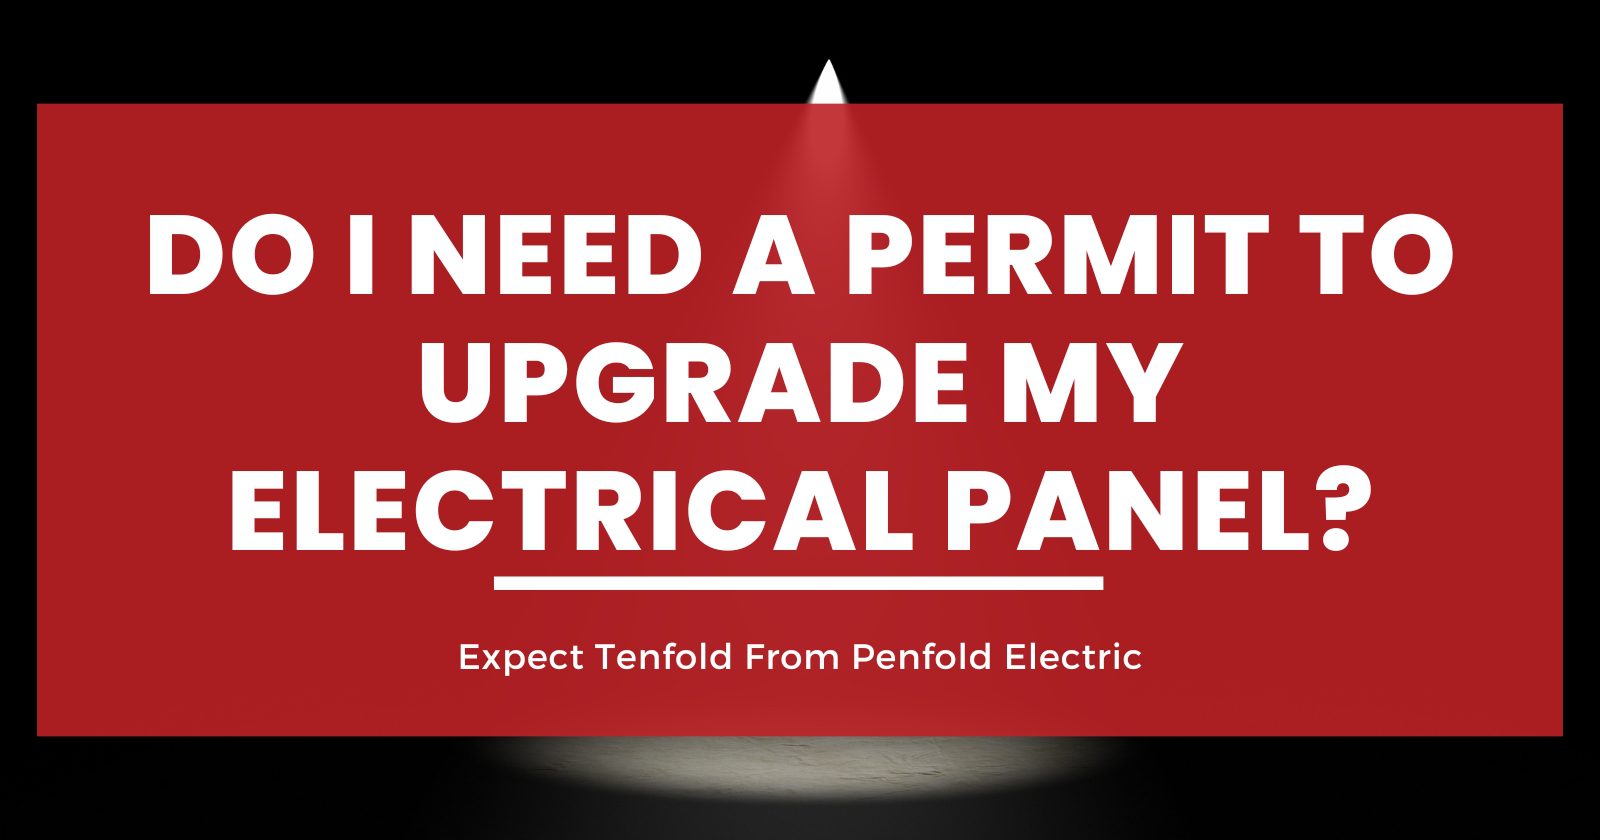 DO I NEED A PERMIT TO UPGRADE MY ELETRICAL PANEL